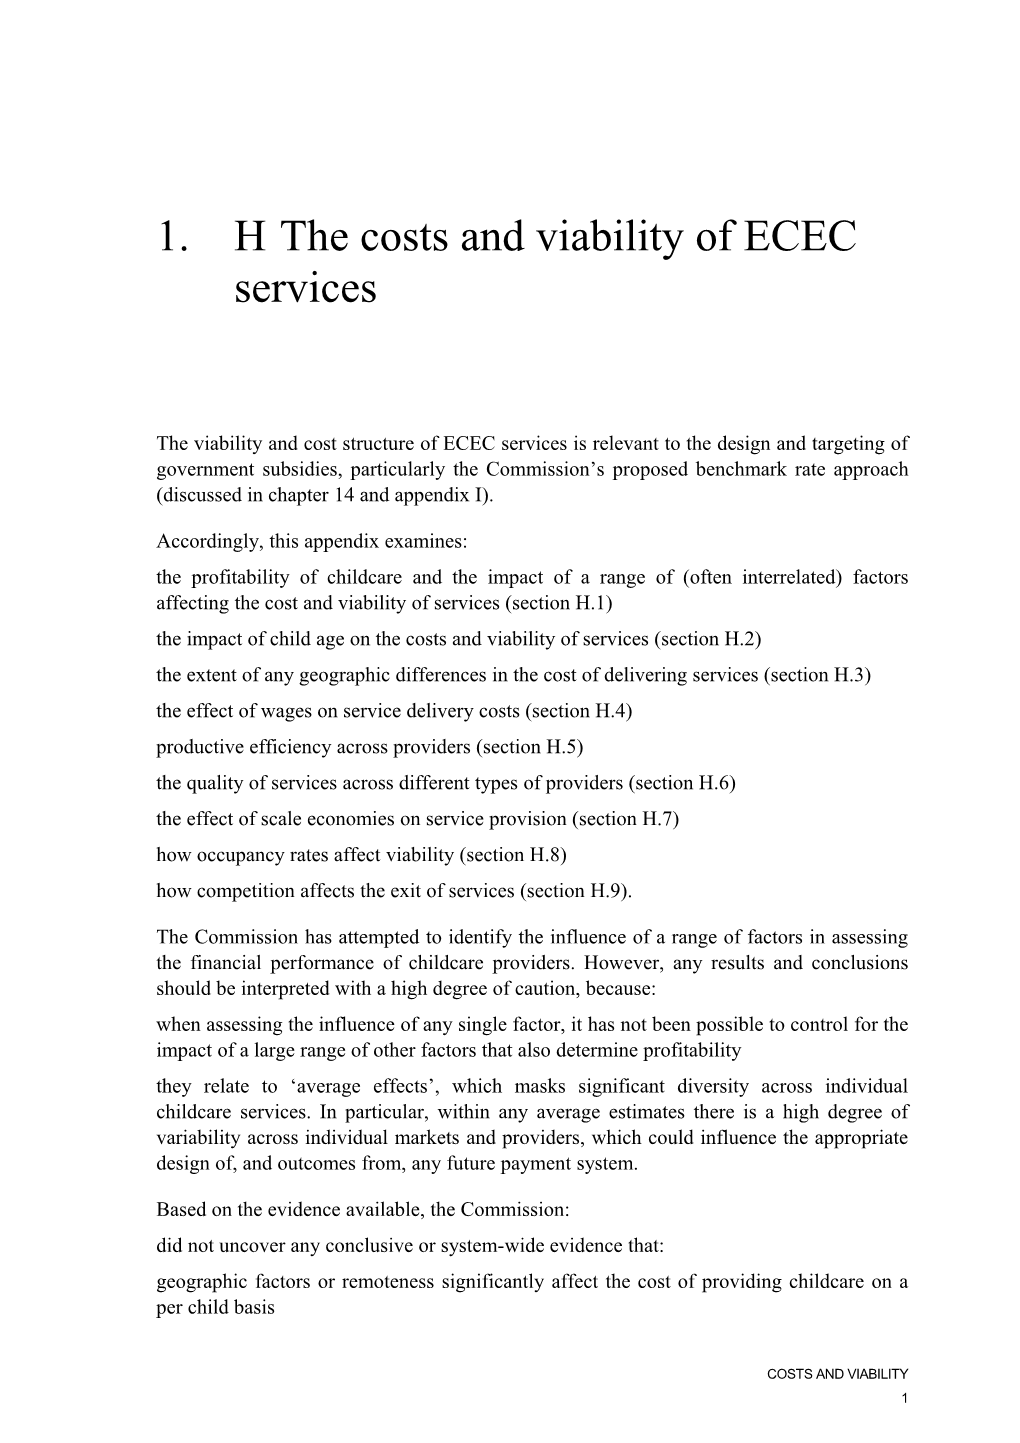 Costs and Viability